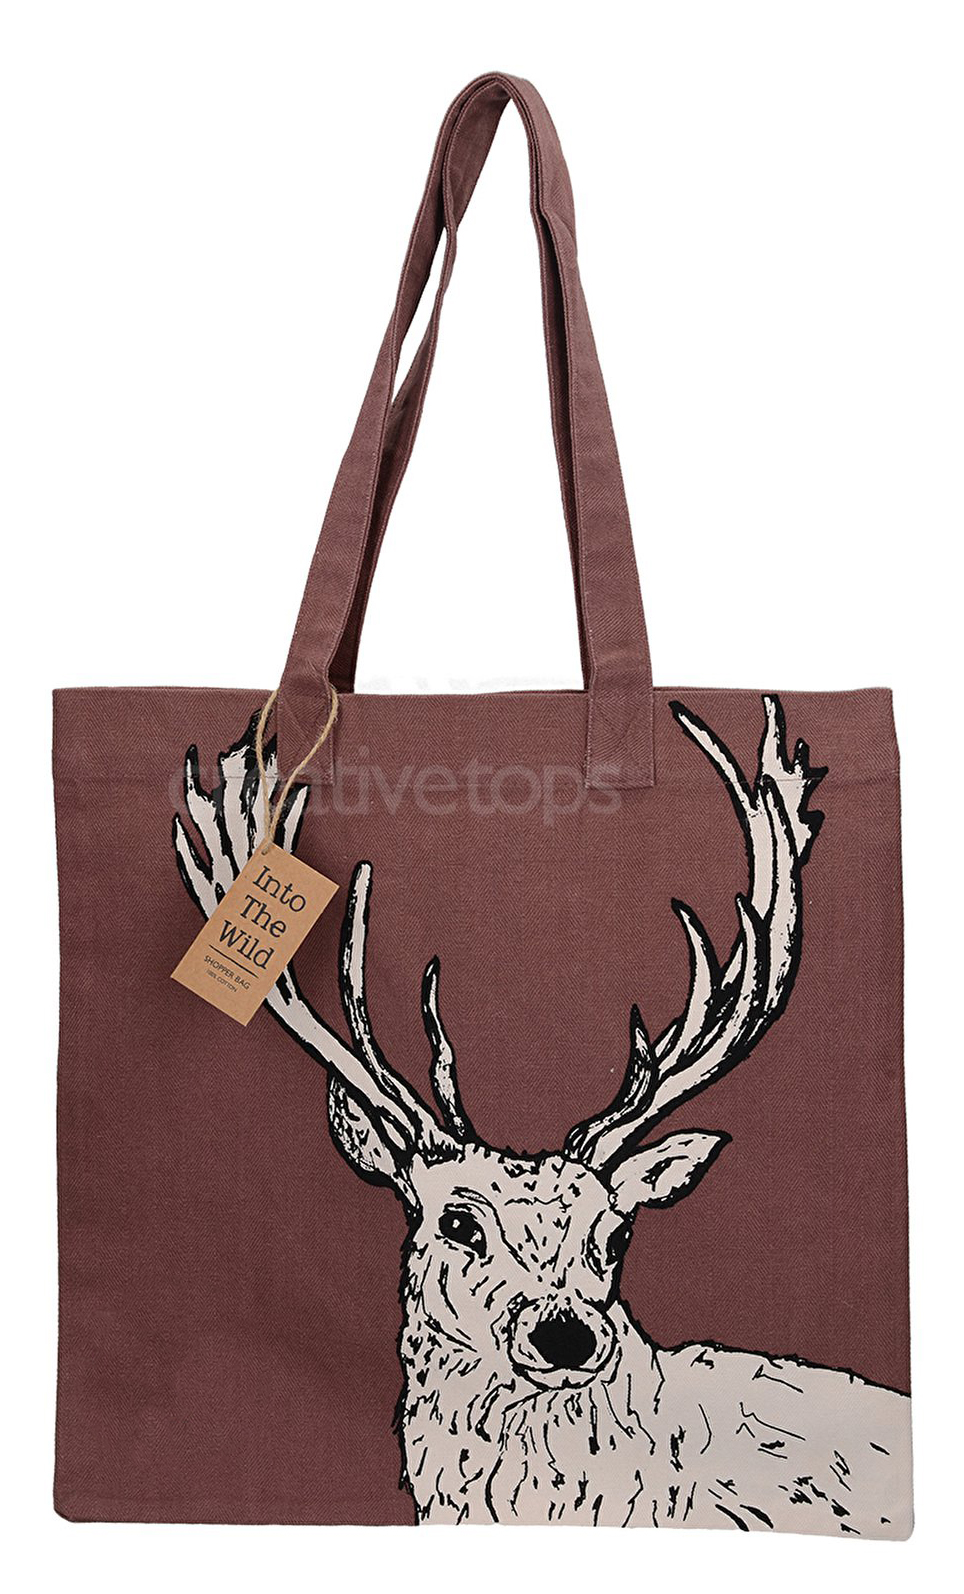 Tote bag - Tops Into The Wild Stag | Creative Tops